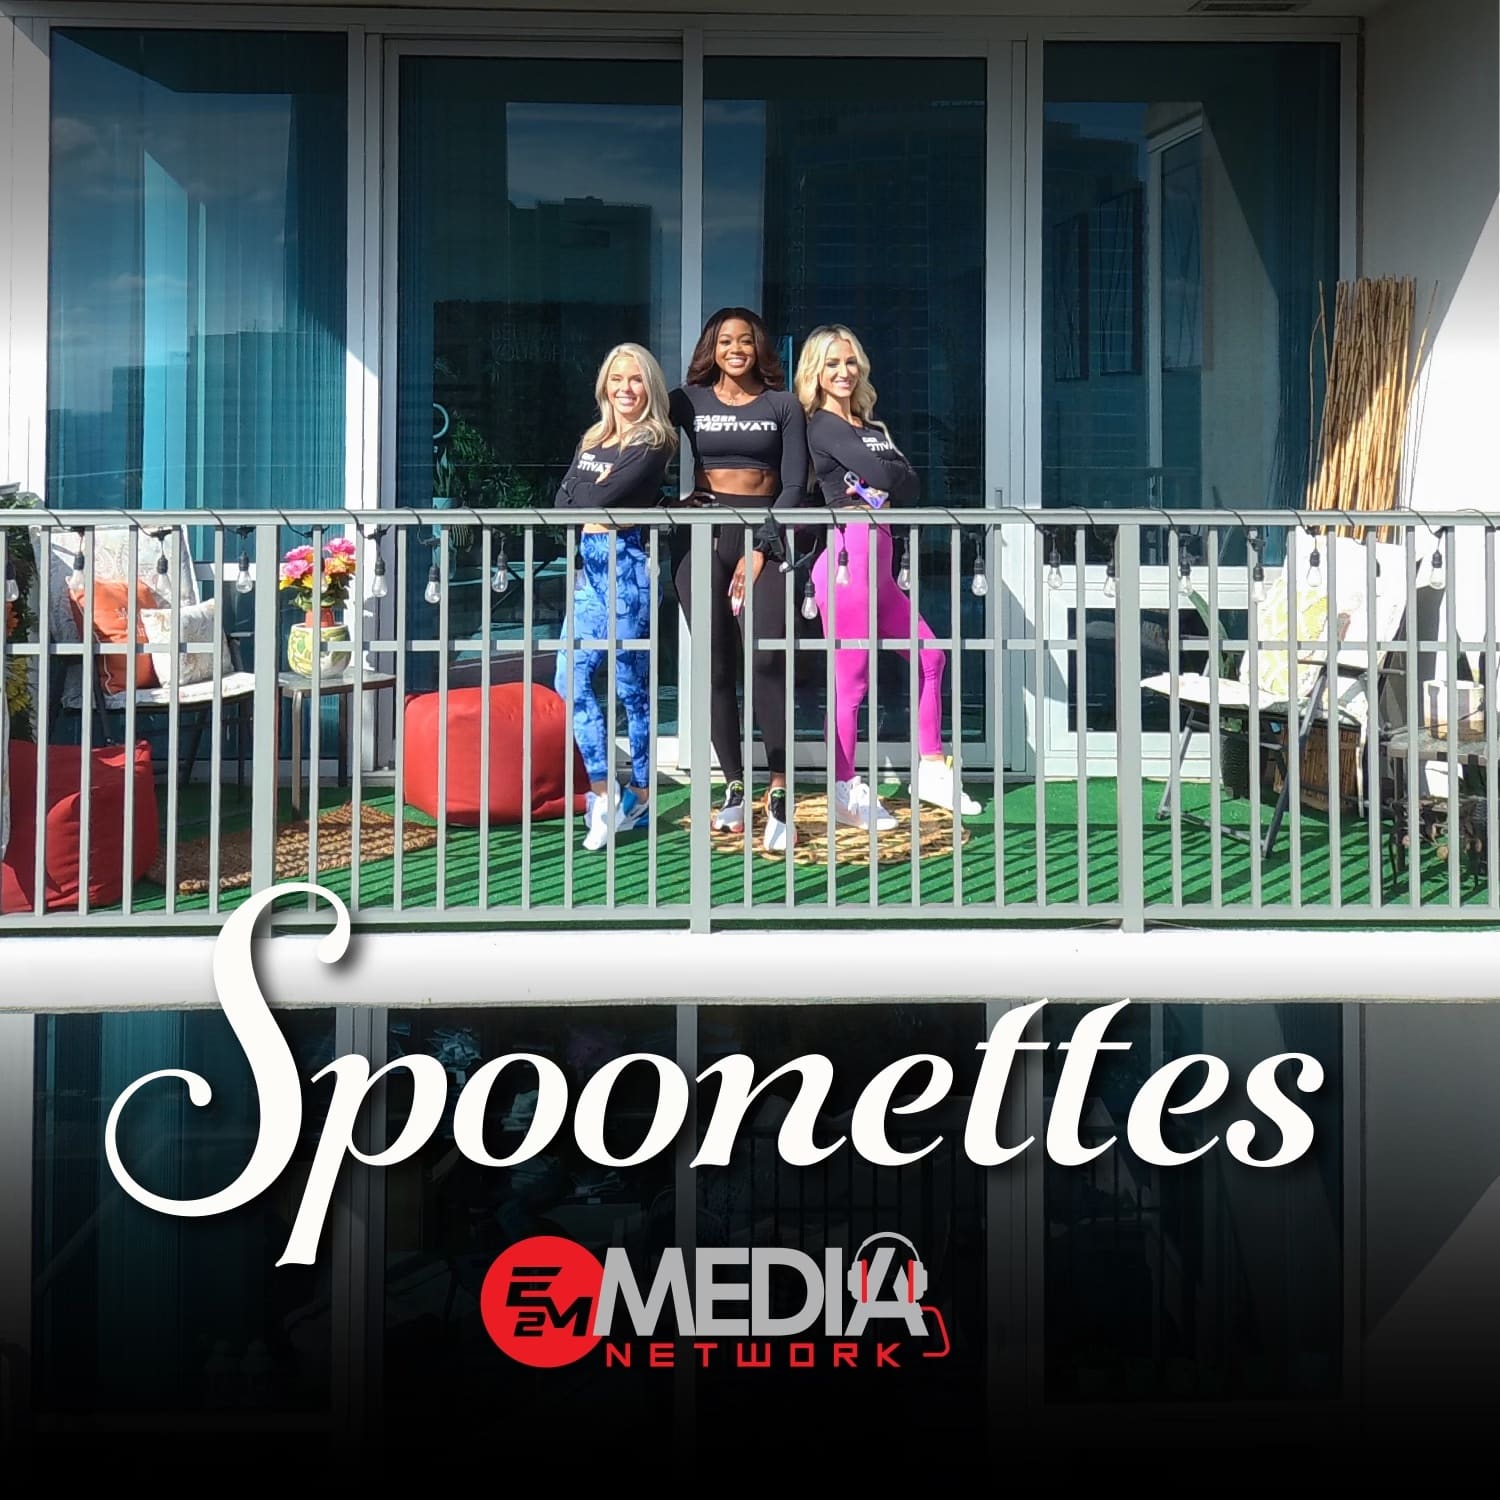 Spoonettes Podcast - The Importance of Maintenance